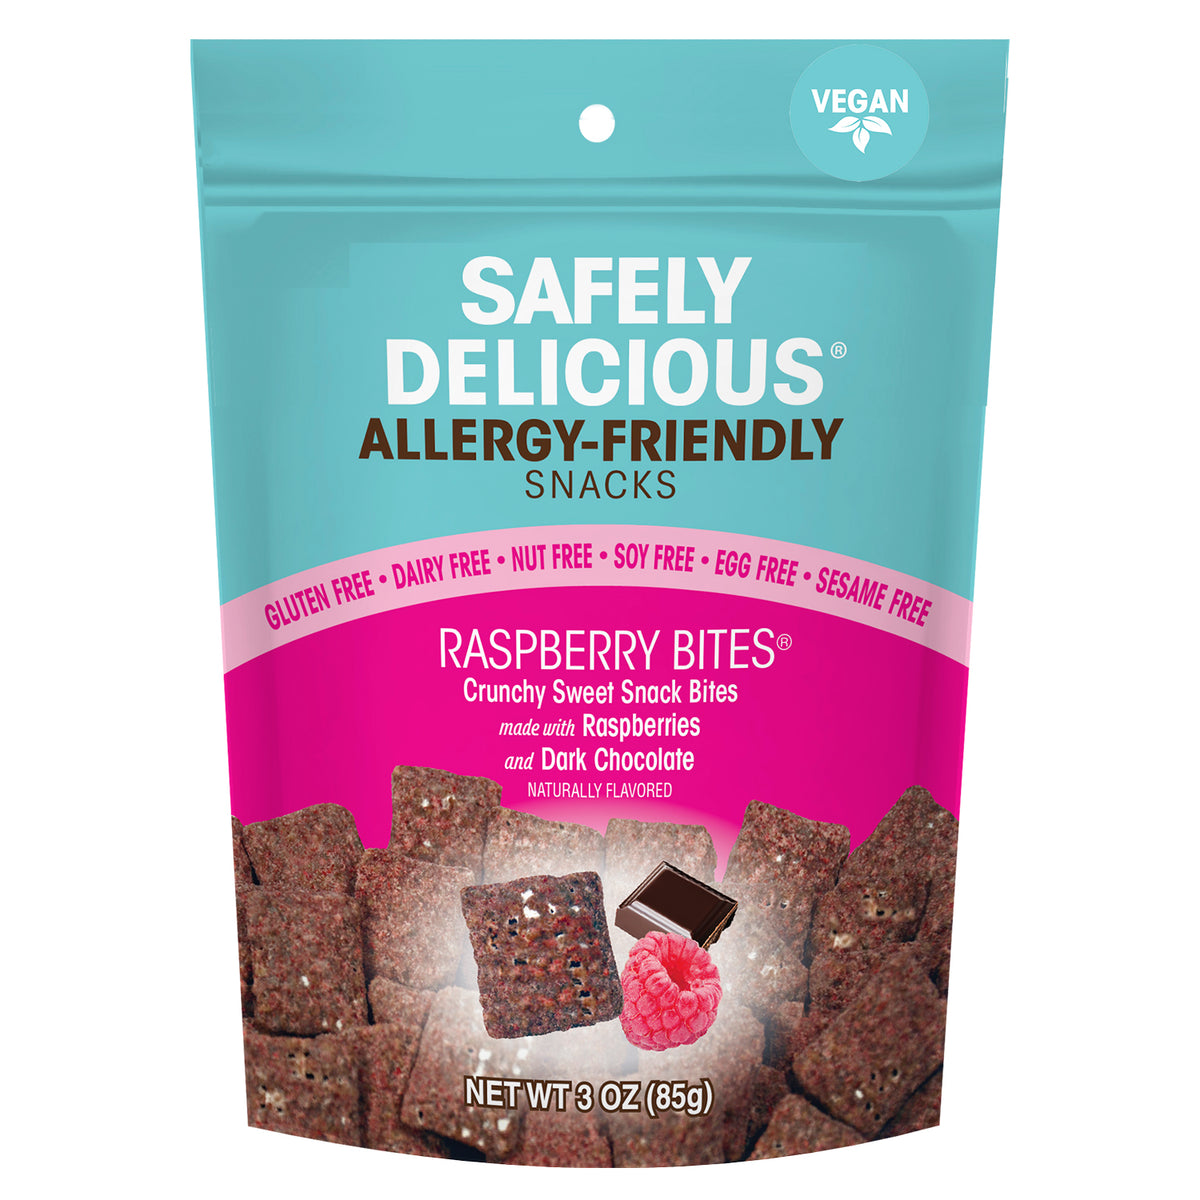 Discounted allergy-friendly food